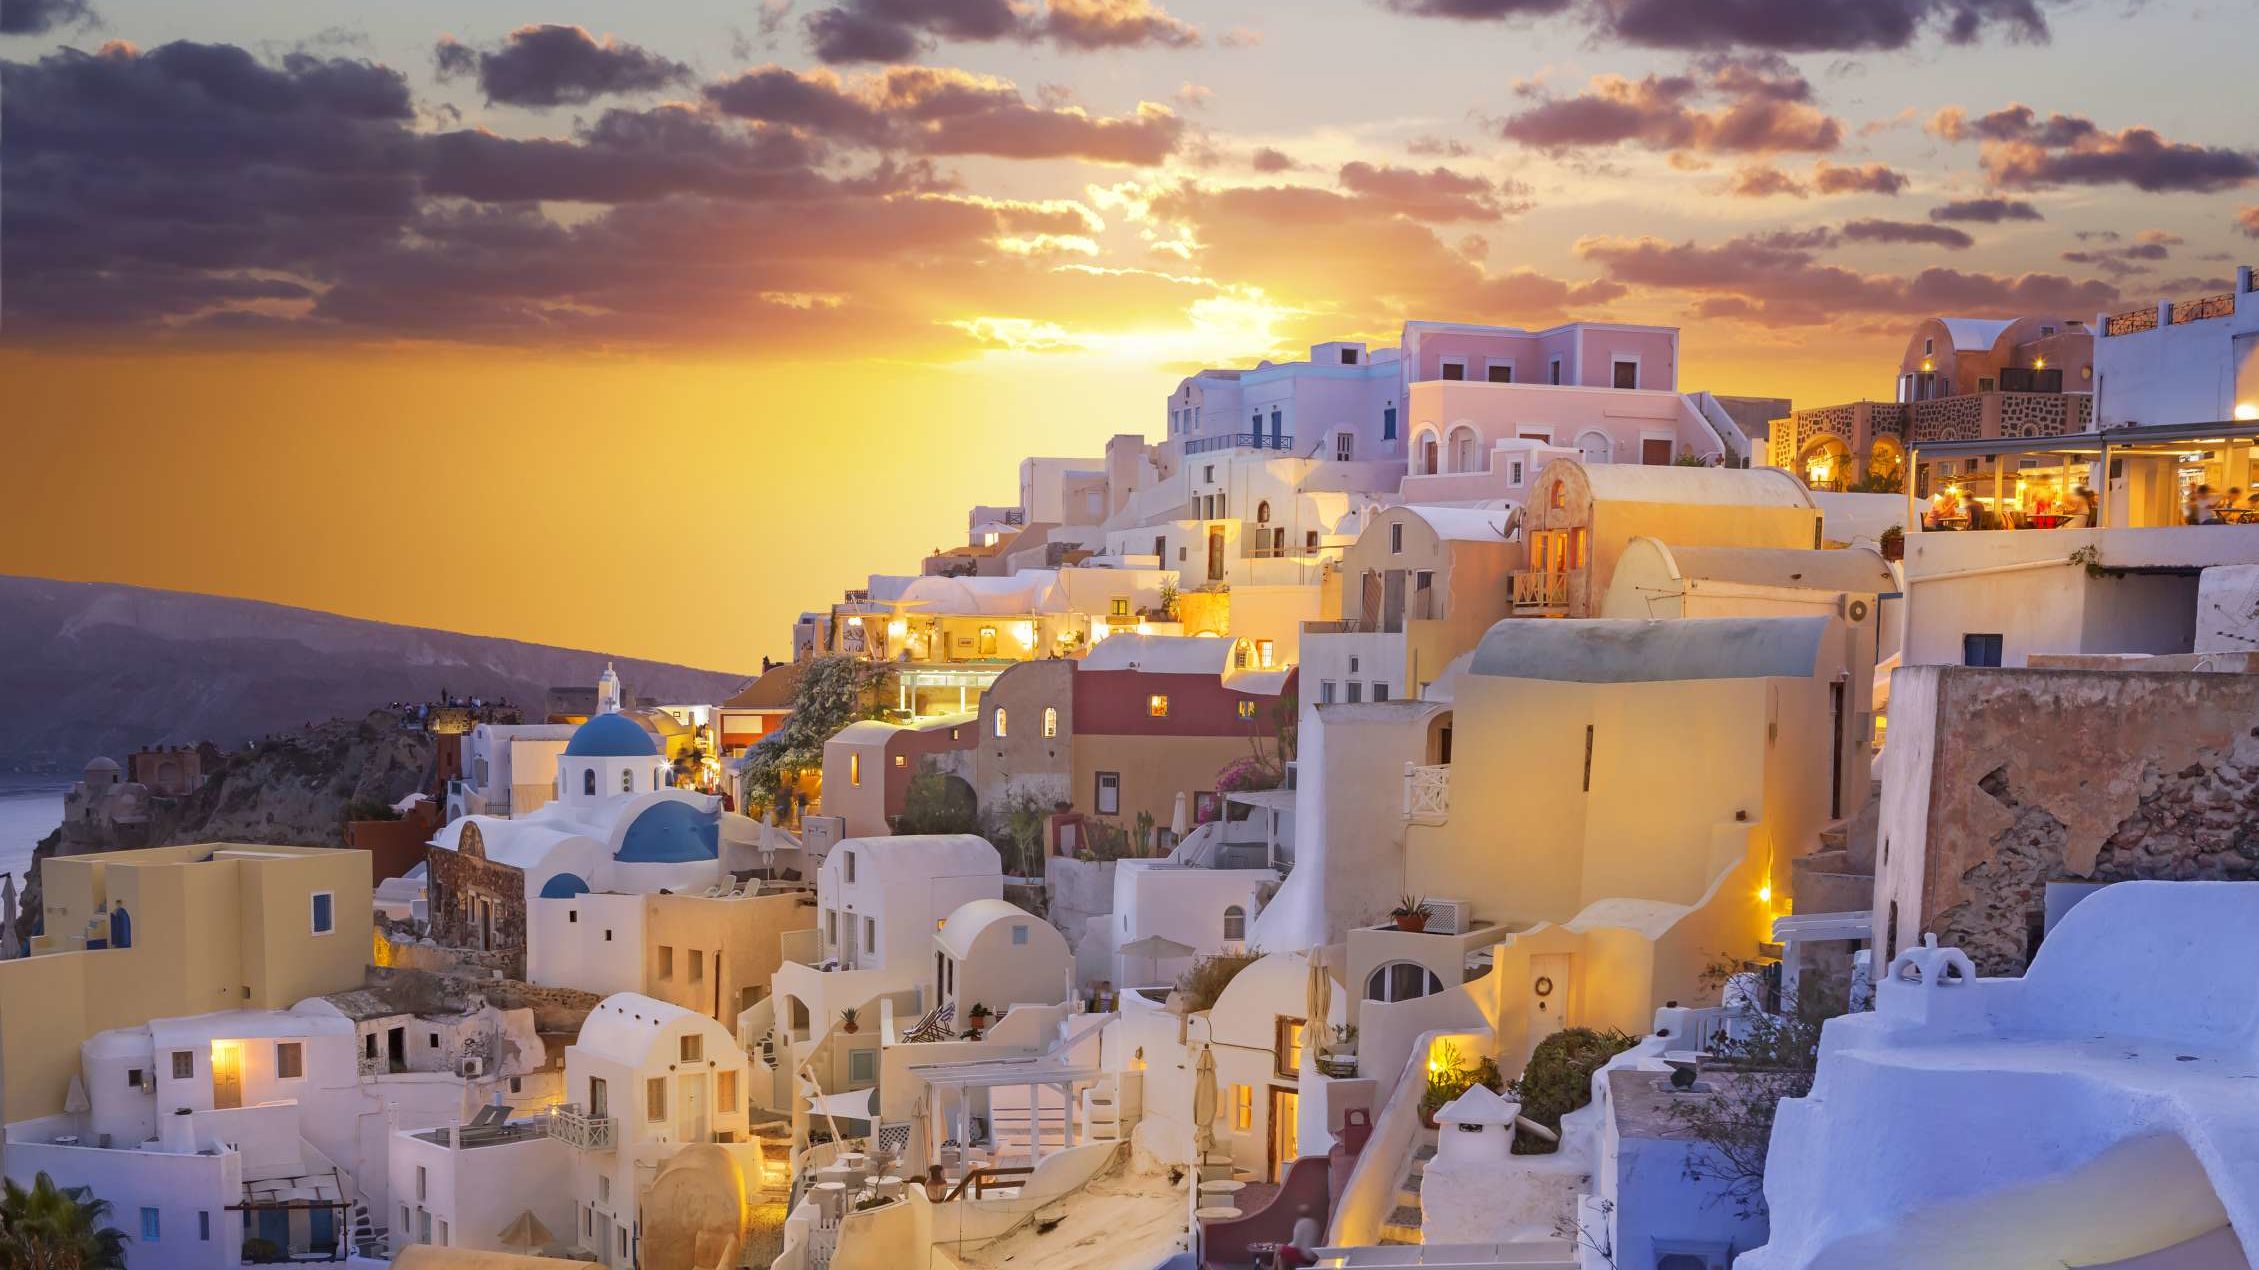 The Best Places to See the Sunset | Mental Floss